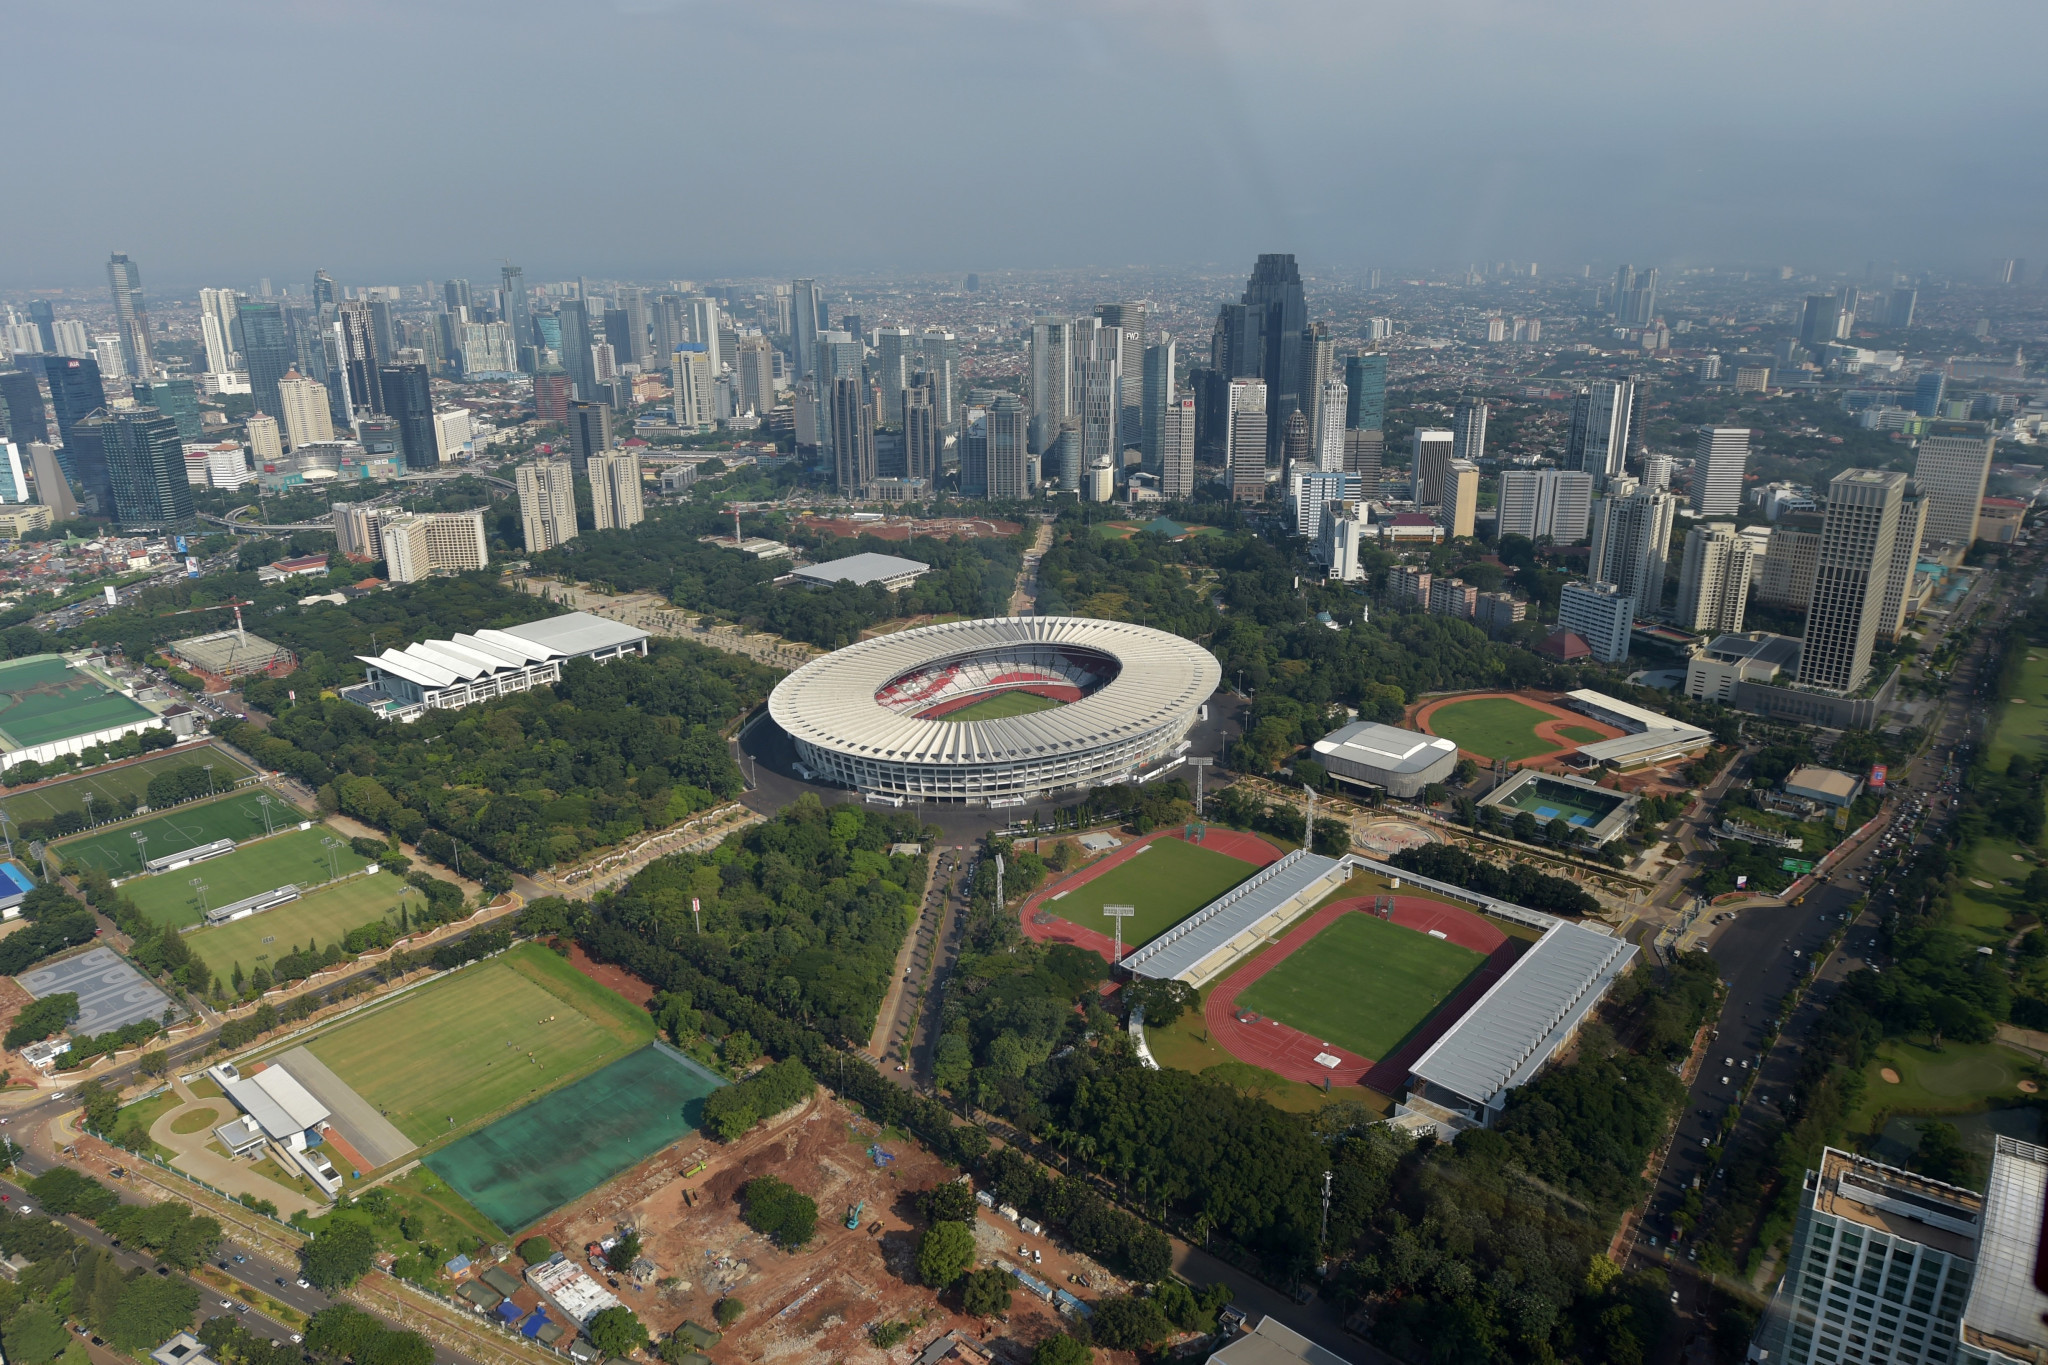 Asian Games organisers express concerns over potential cyber attacks